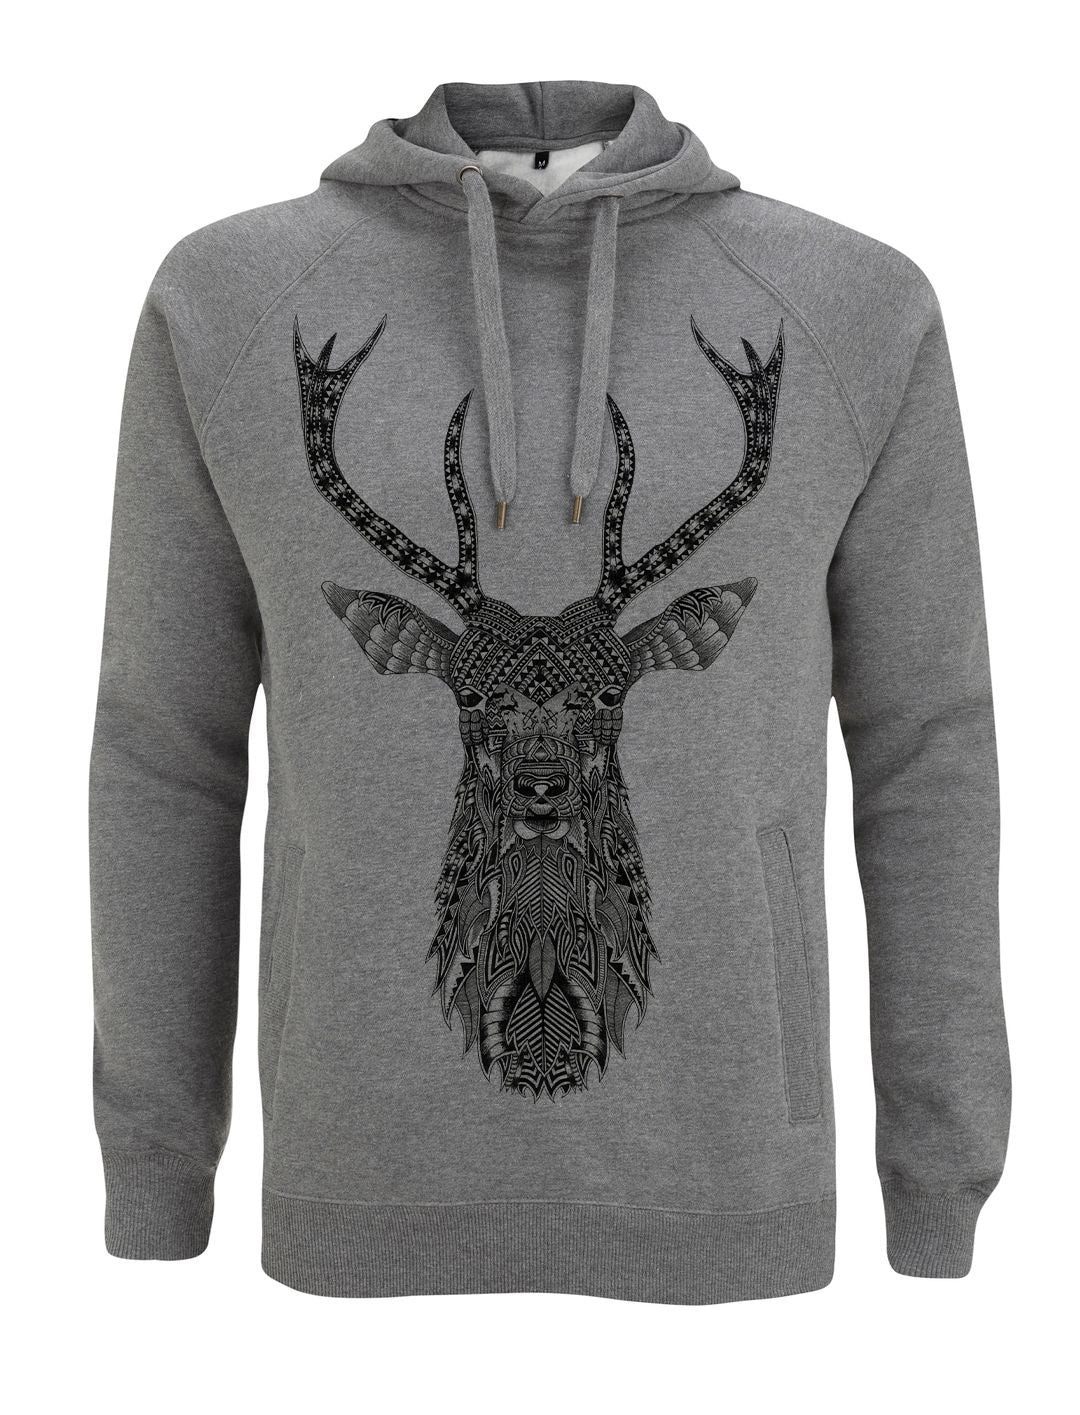 The Stag Hoodie - Sale